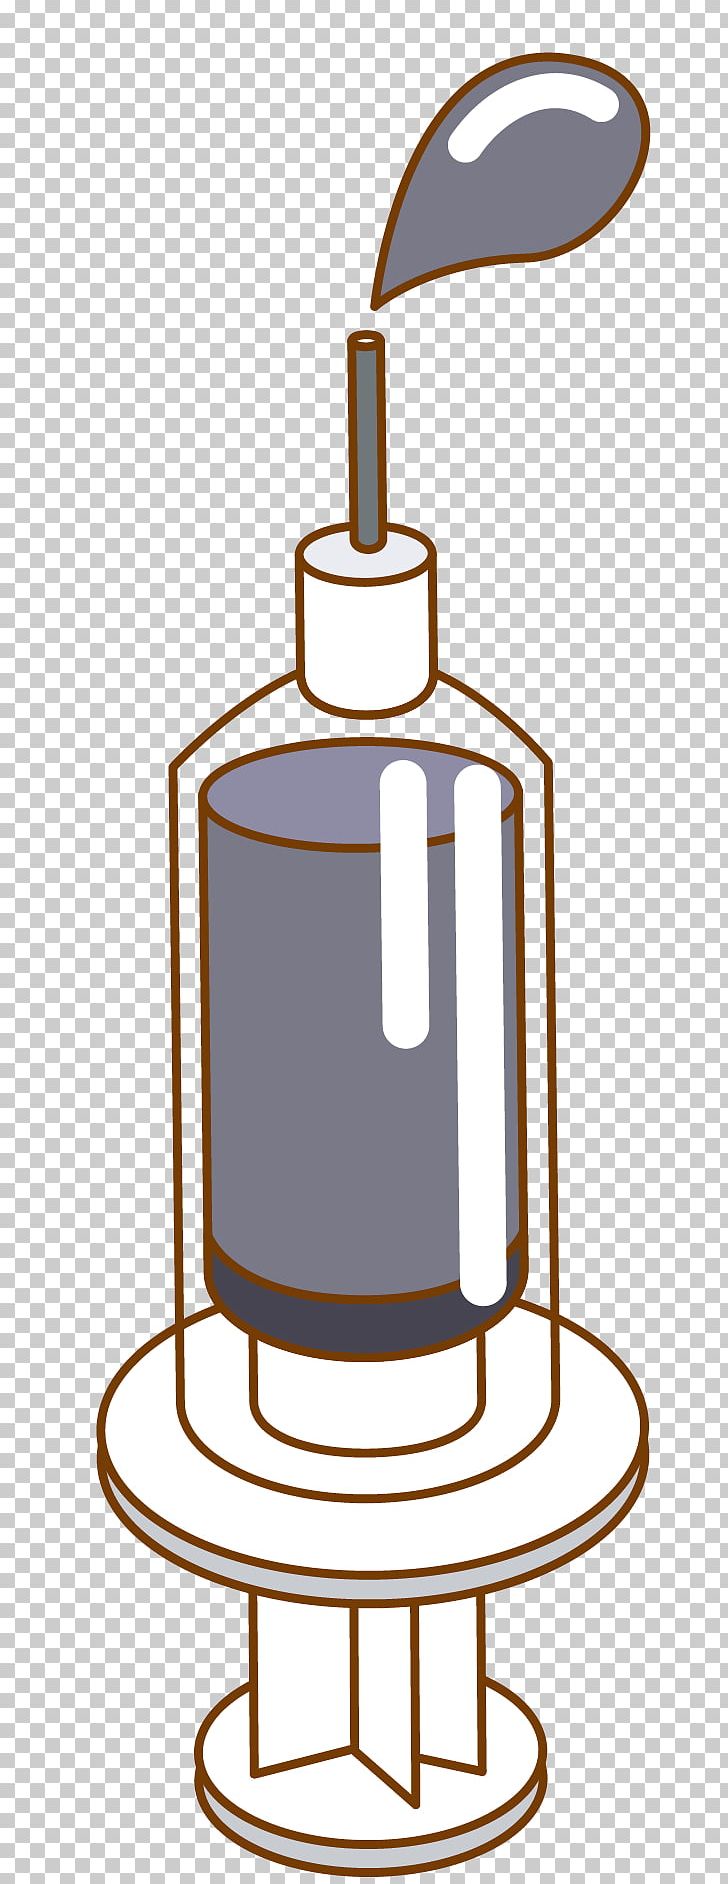 Syringe Cartoon PNG, Clipart, Cartoon, Download, Drawing, Explosion Effect Material, Happy Birthday Vector Images Free PNG Download